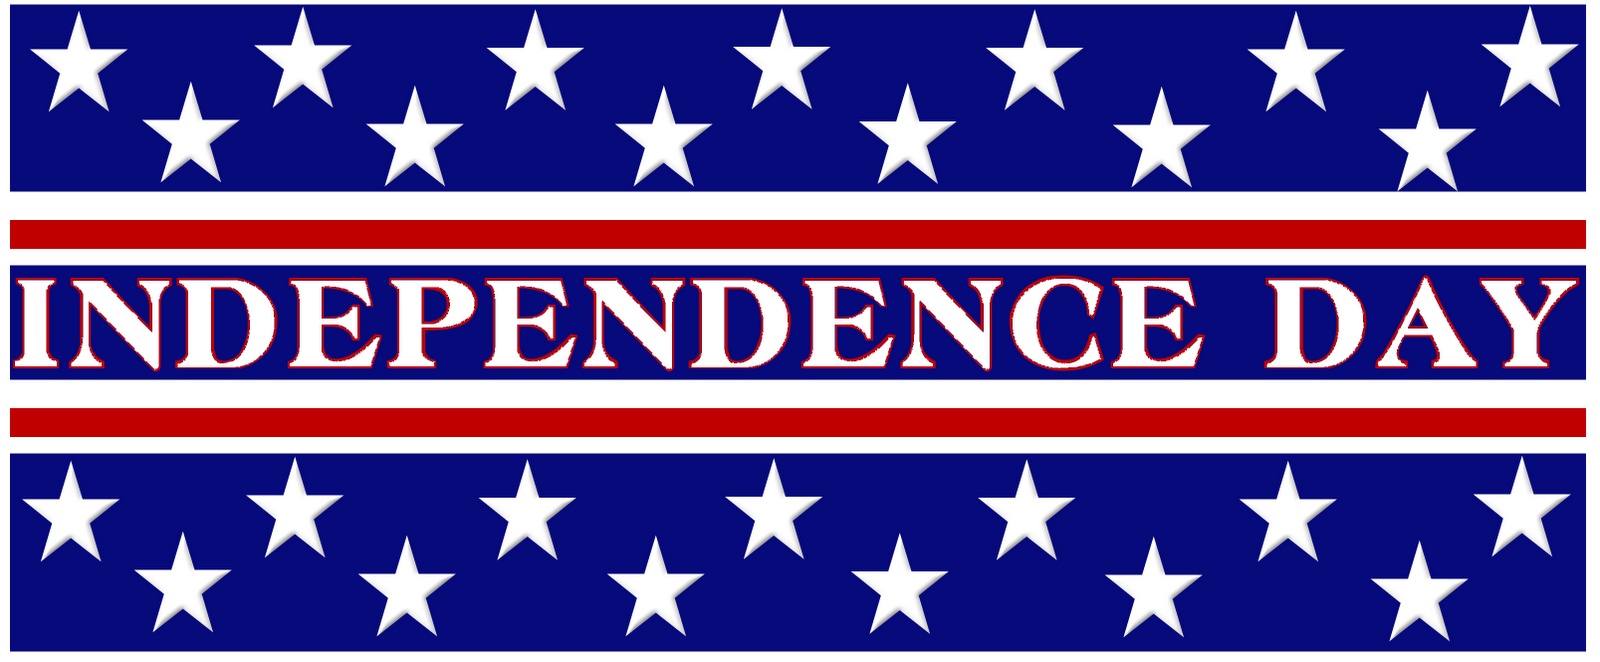 free clipart images independence day - photo #36